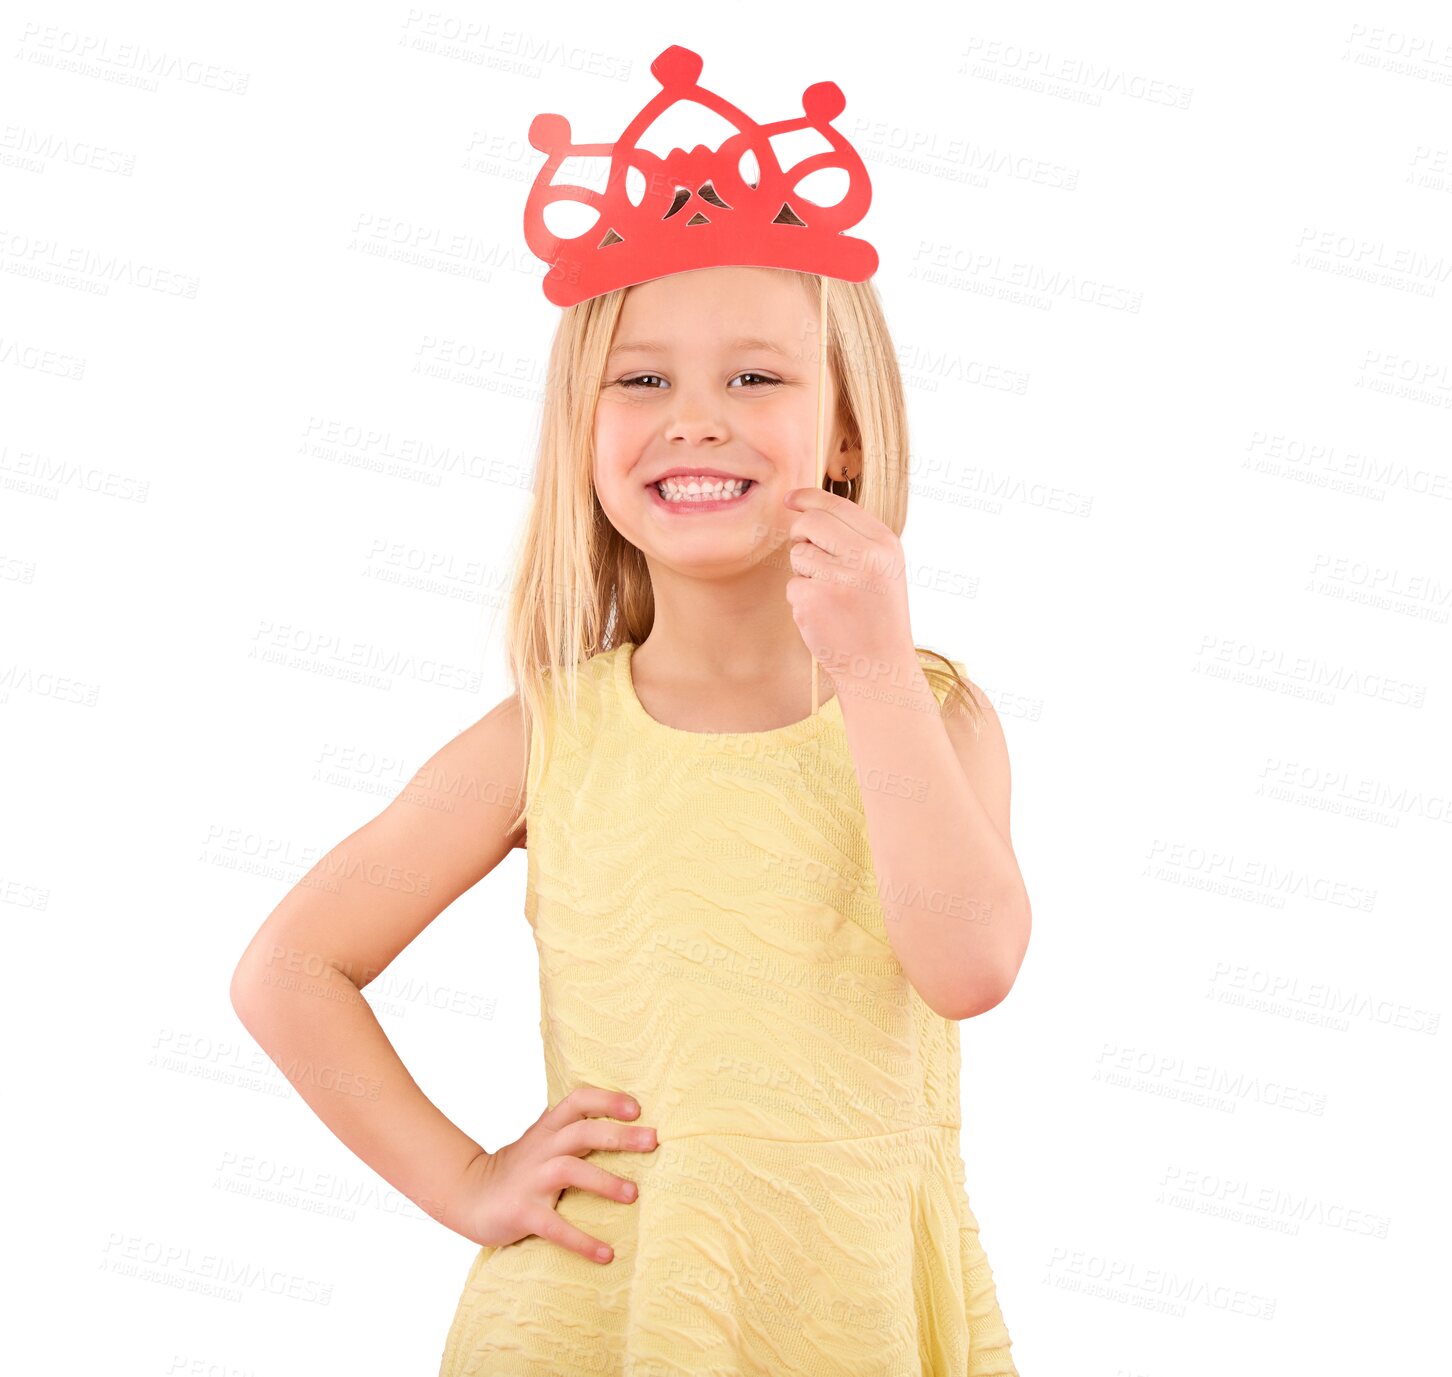 Buy stock photo Isolated girl child, crown and portrait with smile, toys or excited for princess game by transparent png background. Royal female kid, model and happy with tiara, playing and fantasy with creativity